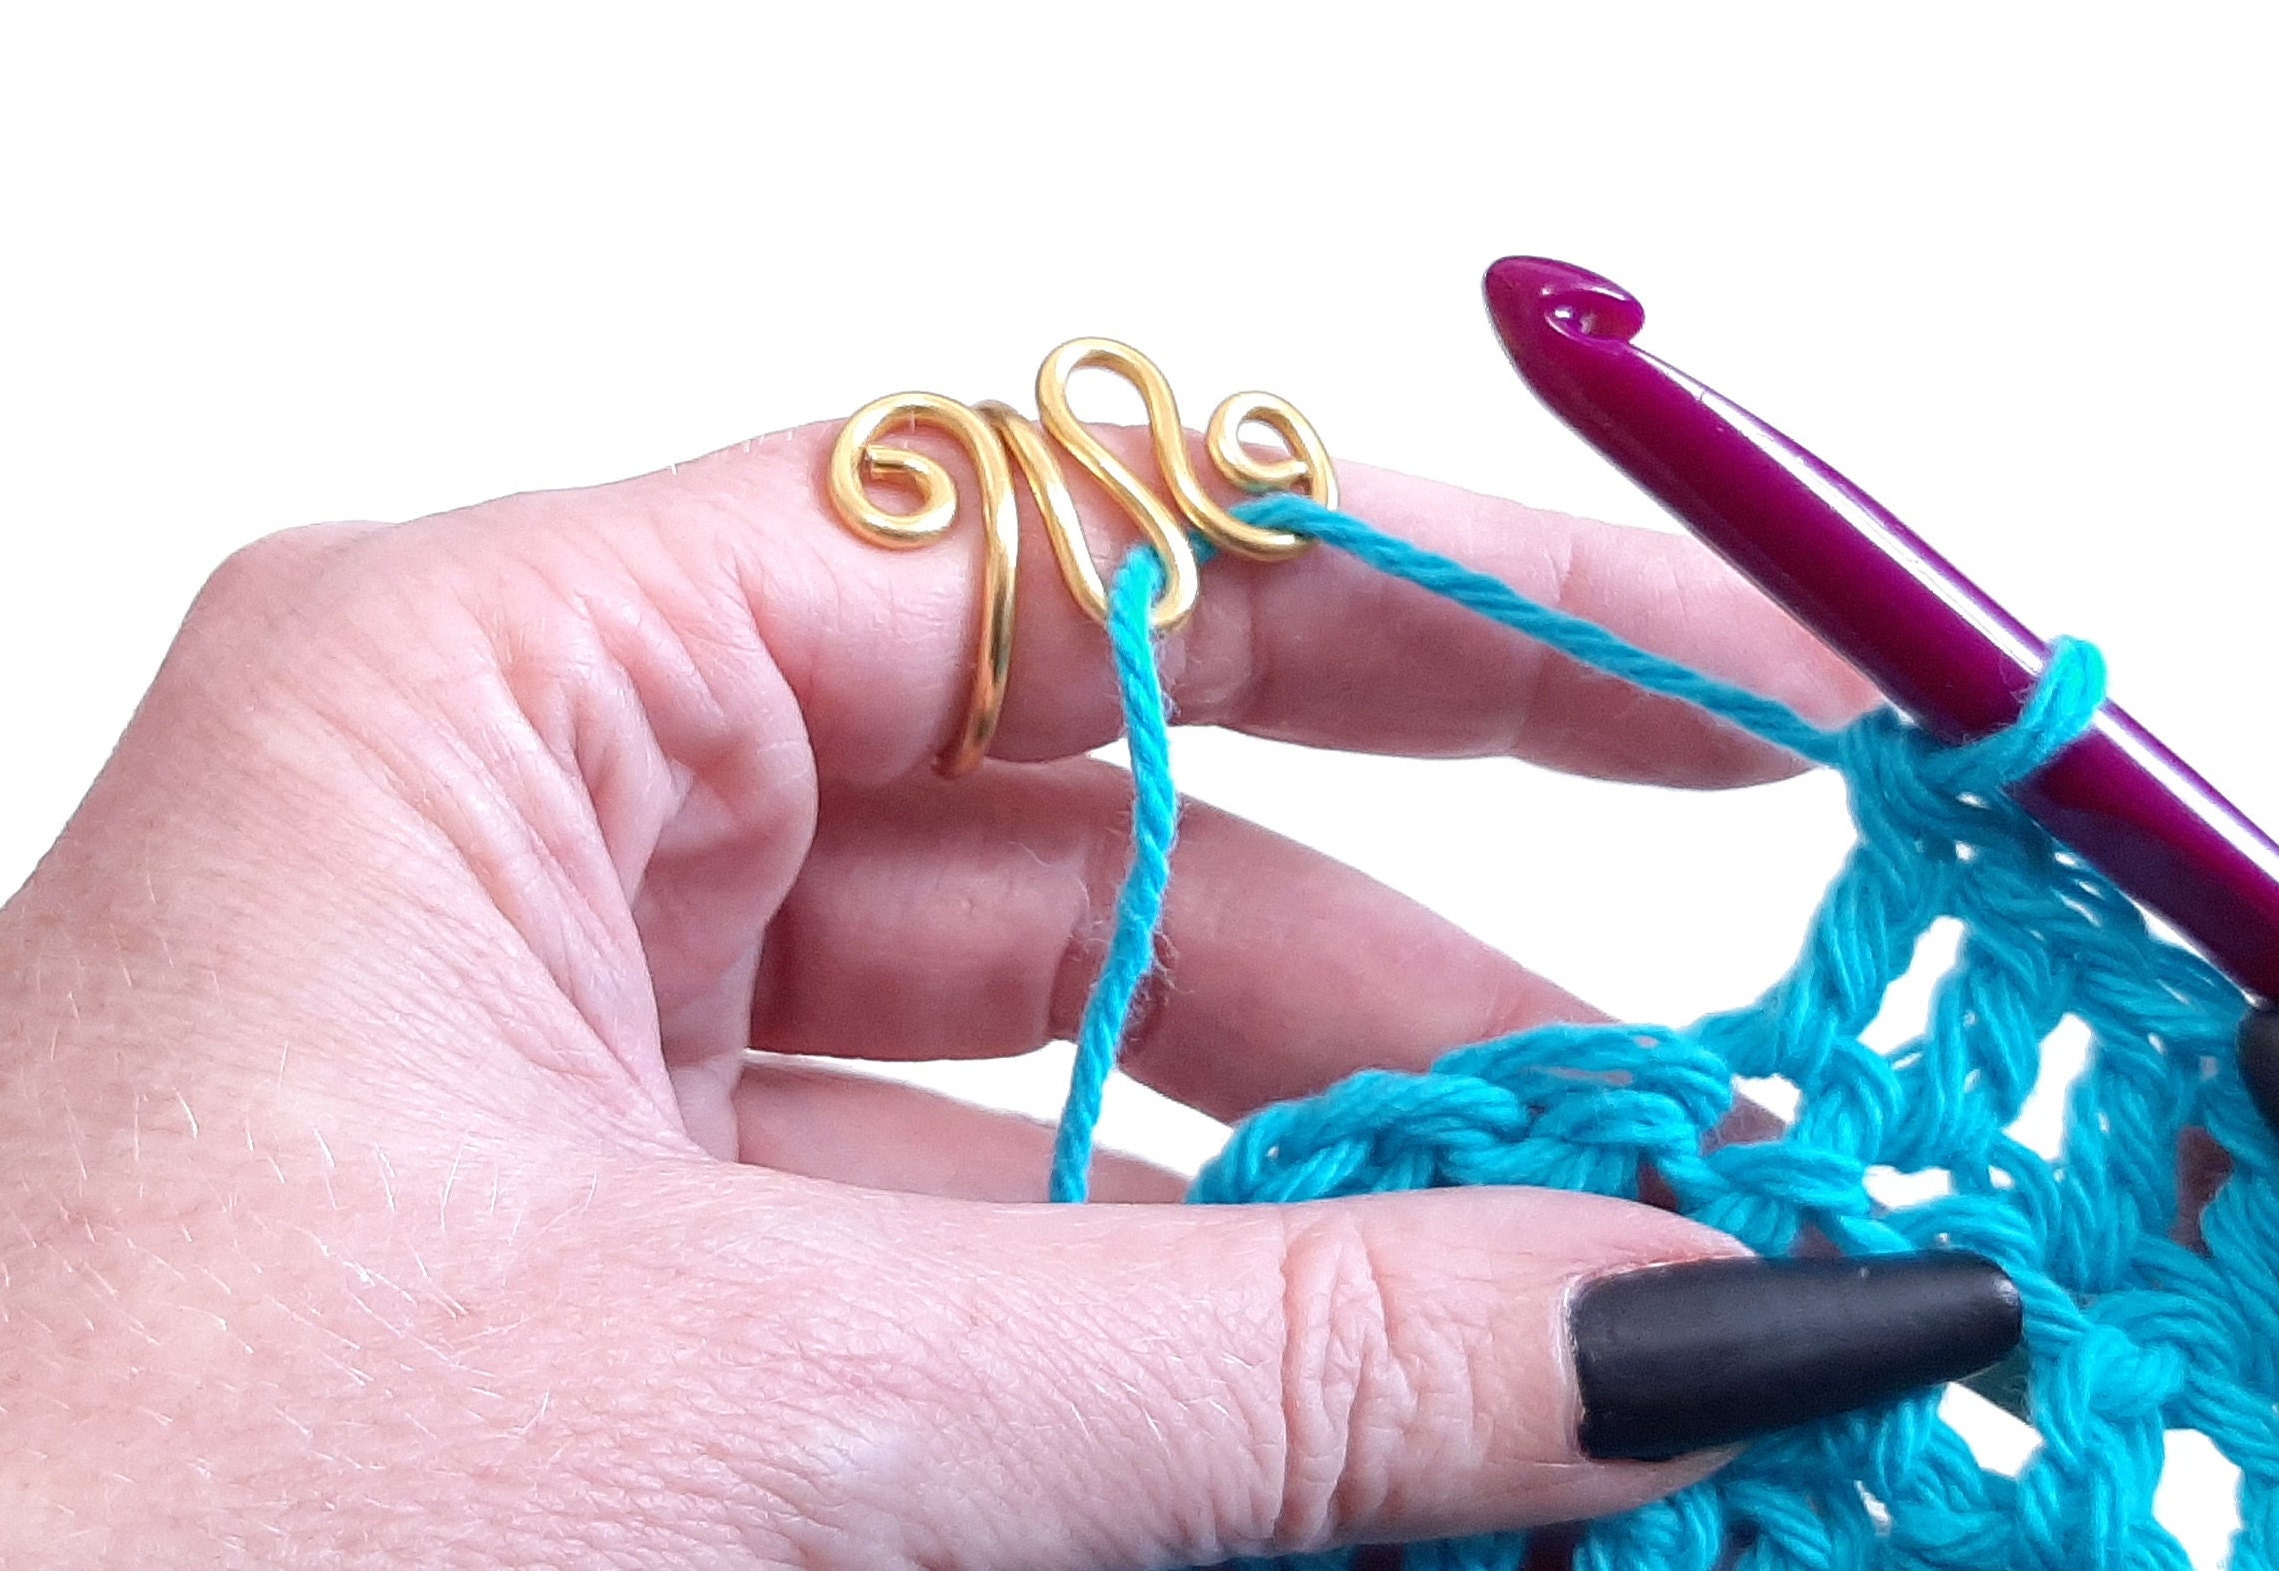 Handmade Zigzag Crochet Tension Ring Wire Wrapped Knitting or